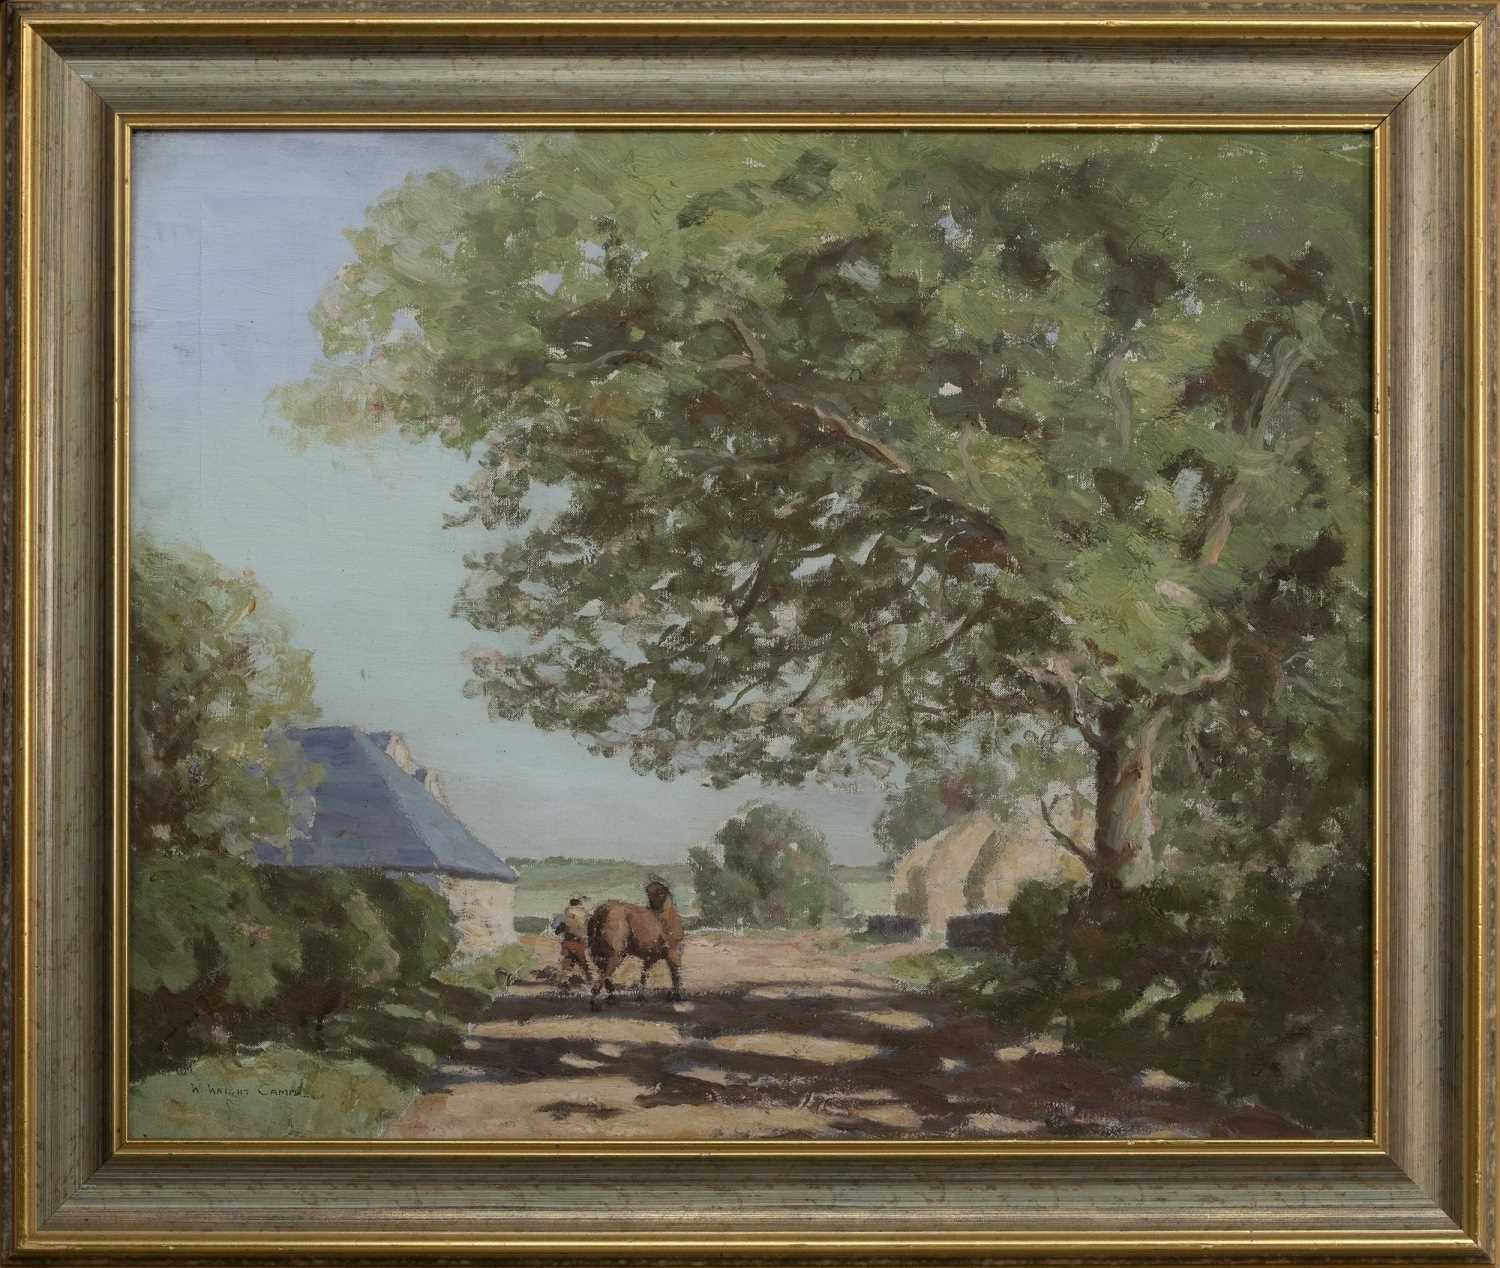 SUMMER - HORSE & HORSEMAN, AN OIL BY WILLIAM WRIGHT CAMPBELL